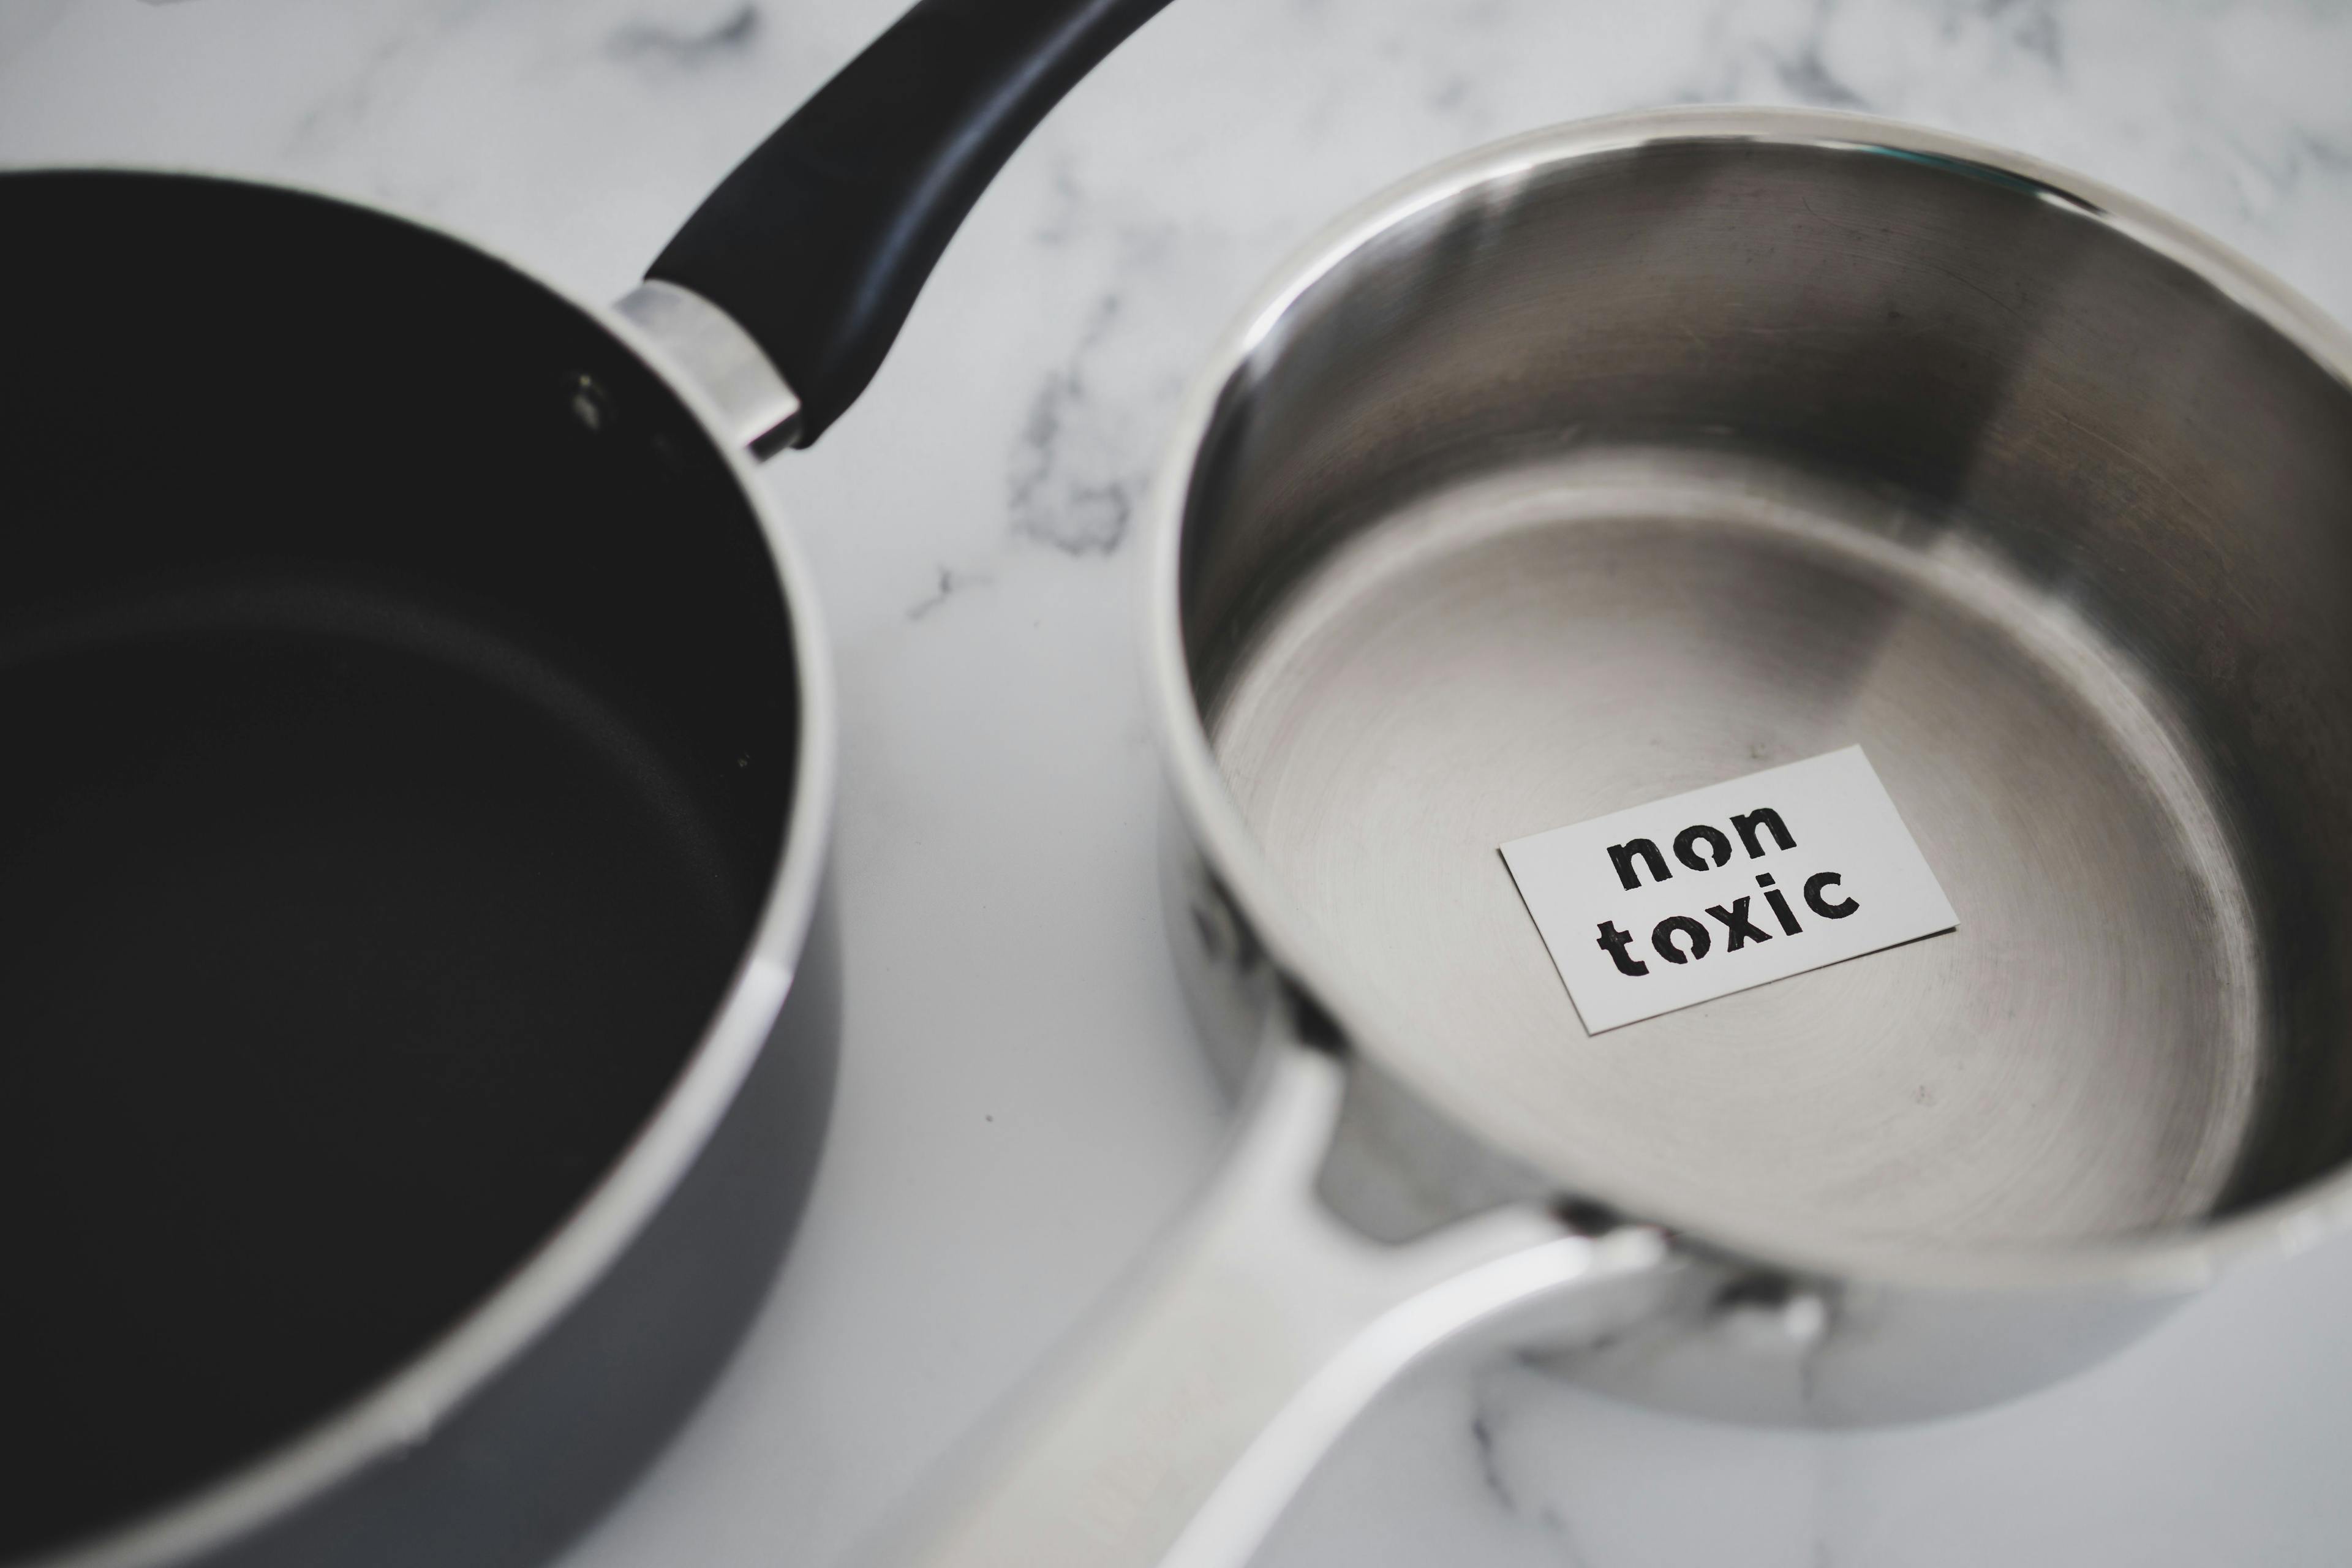 healthy cooking concept, stainless steel vs non stick saucepan side by side with Non Toxic label on the first one | Image Credit: © faithie - stock.adobe.com